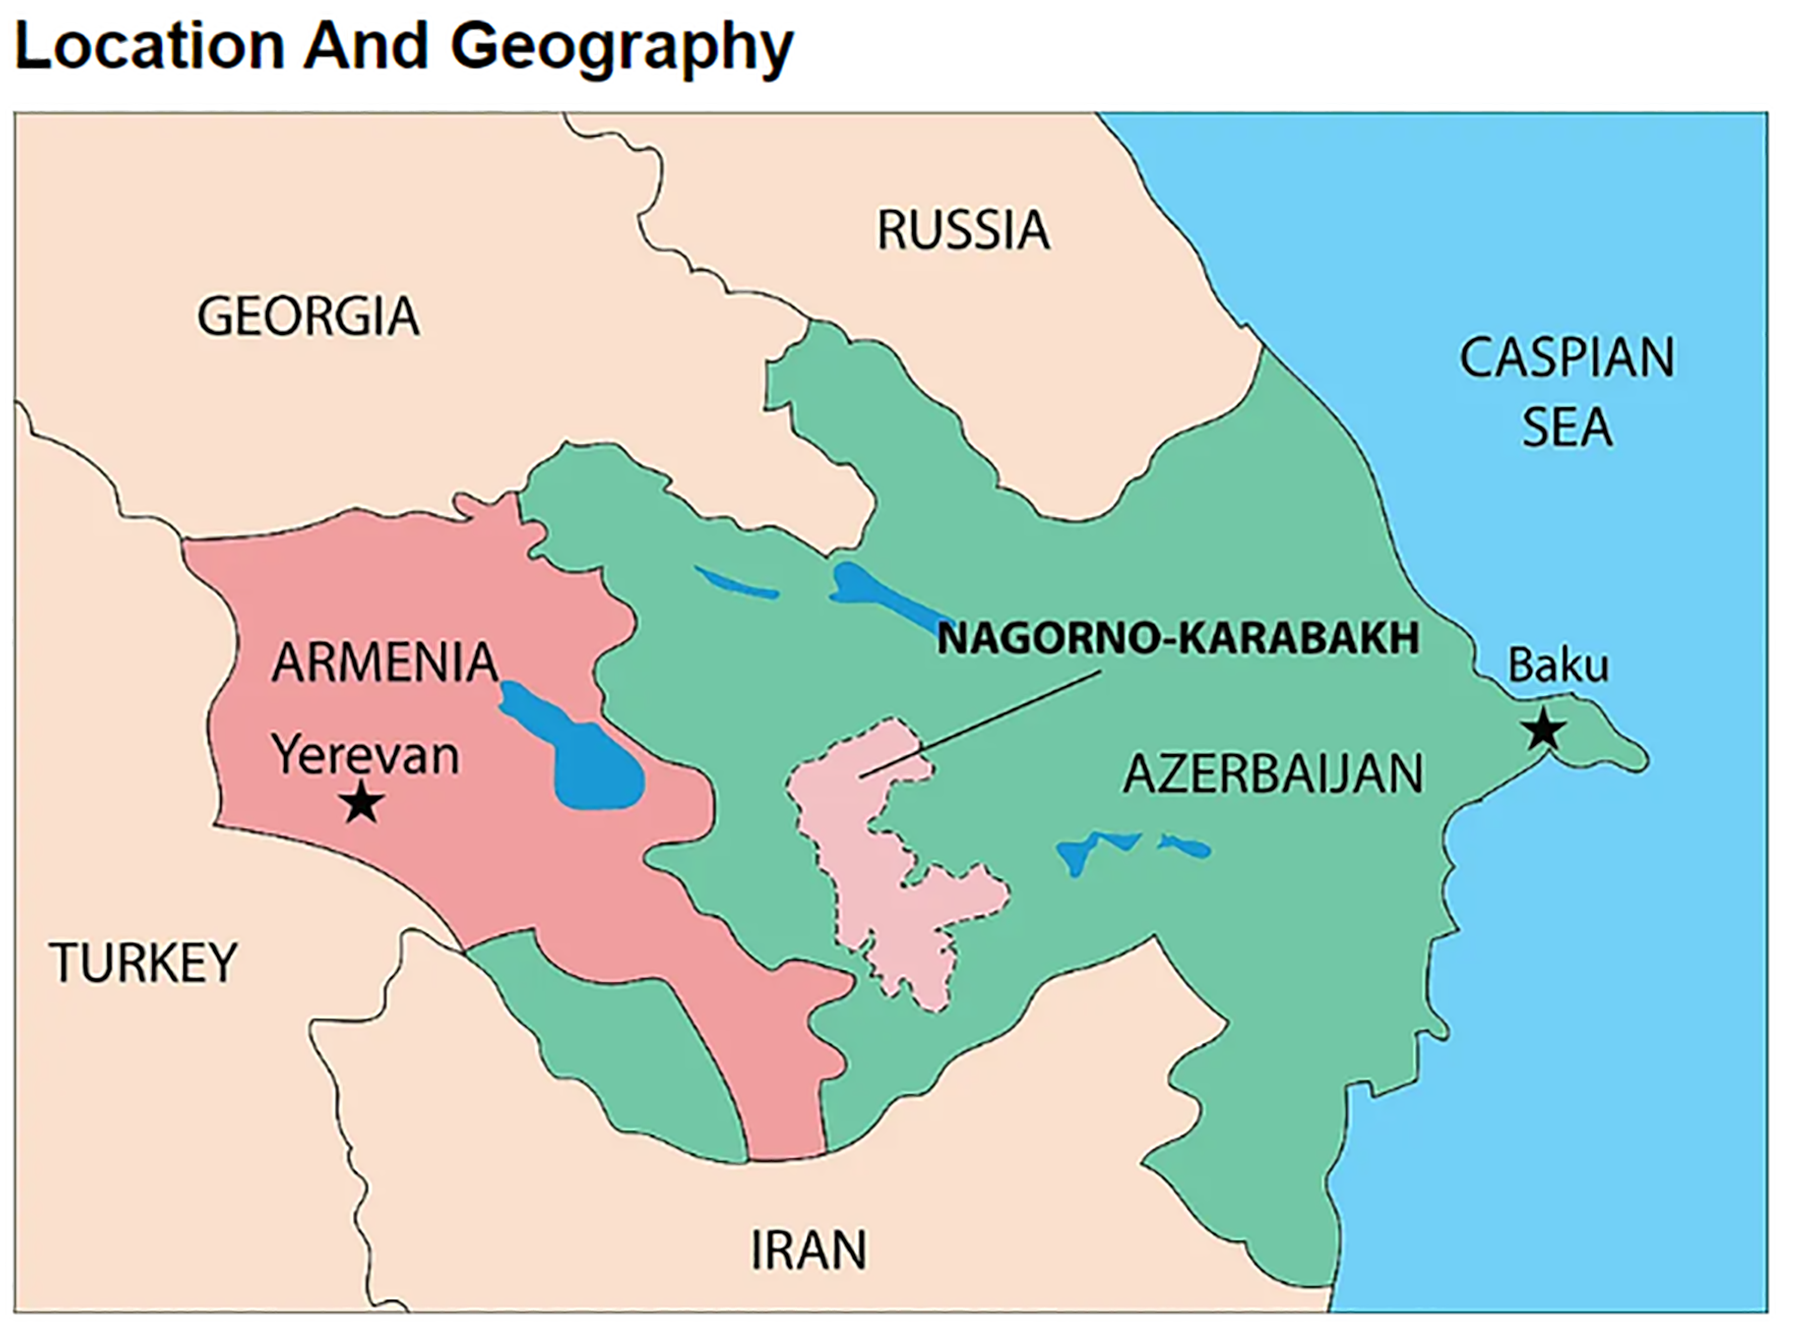 Armenia is turning against its erstwhile guardian, Russia